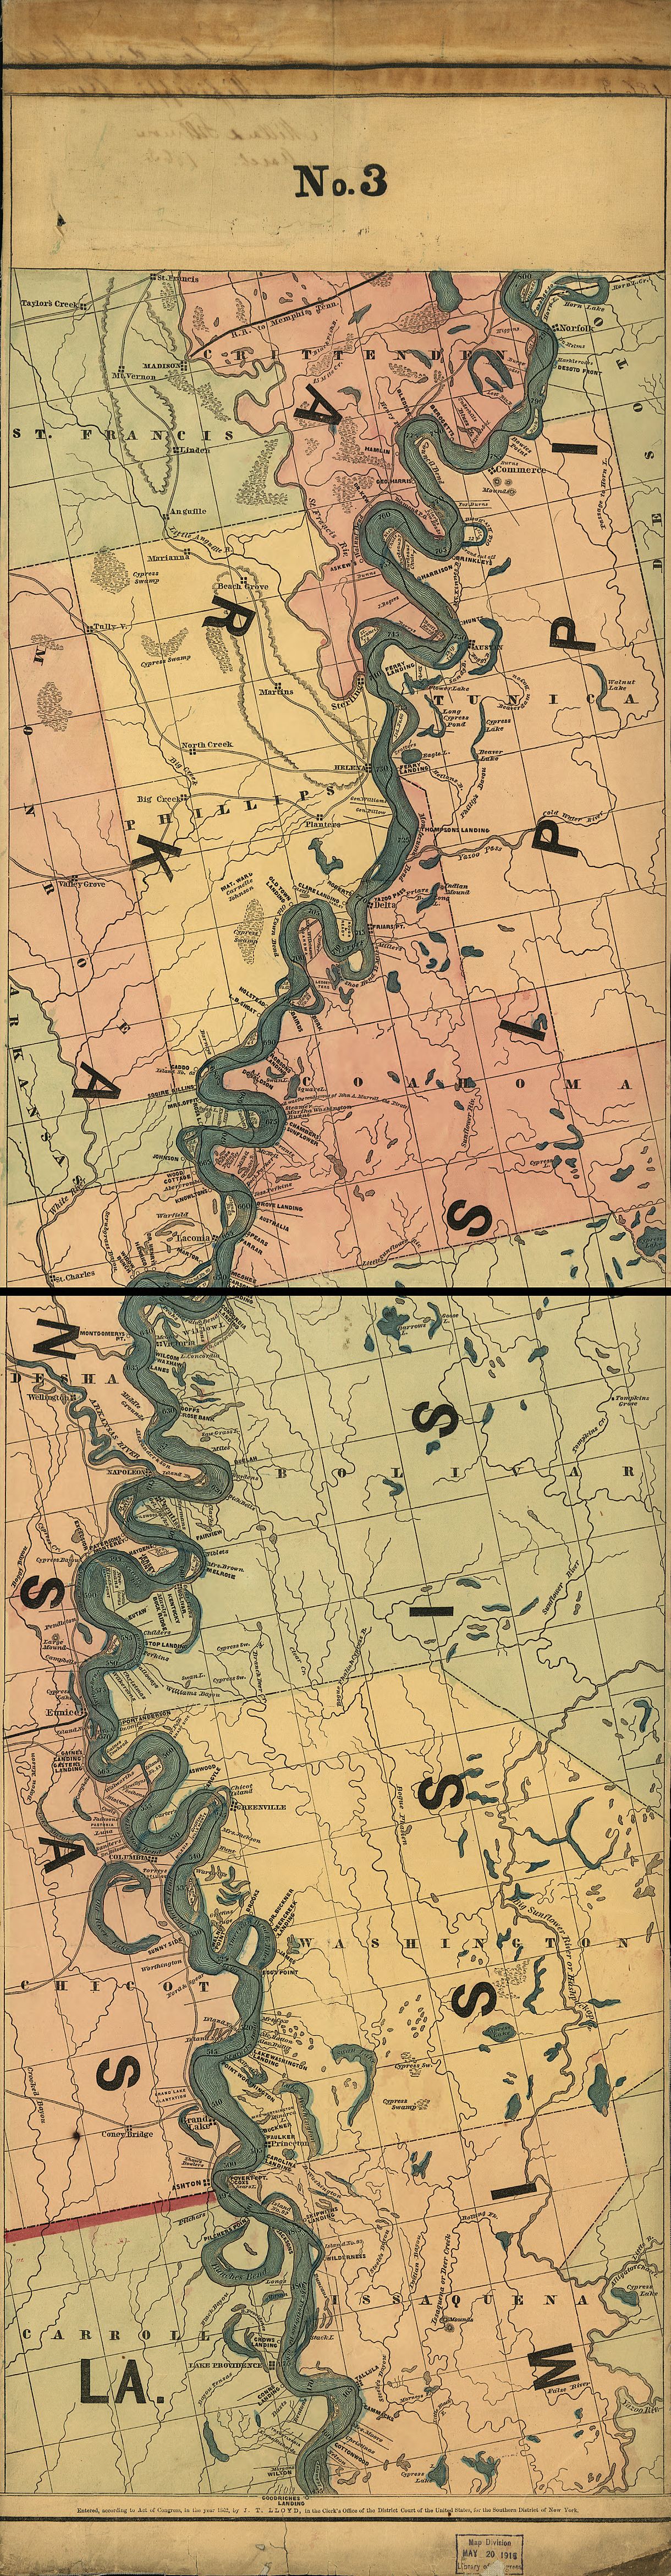 An 1862 map shows Christmas directly on the Mississippi River